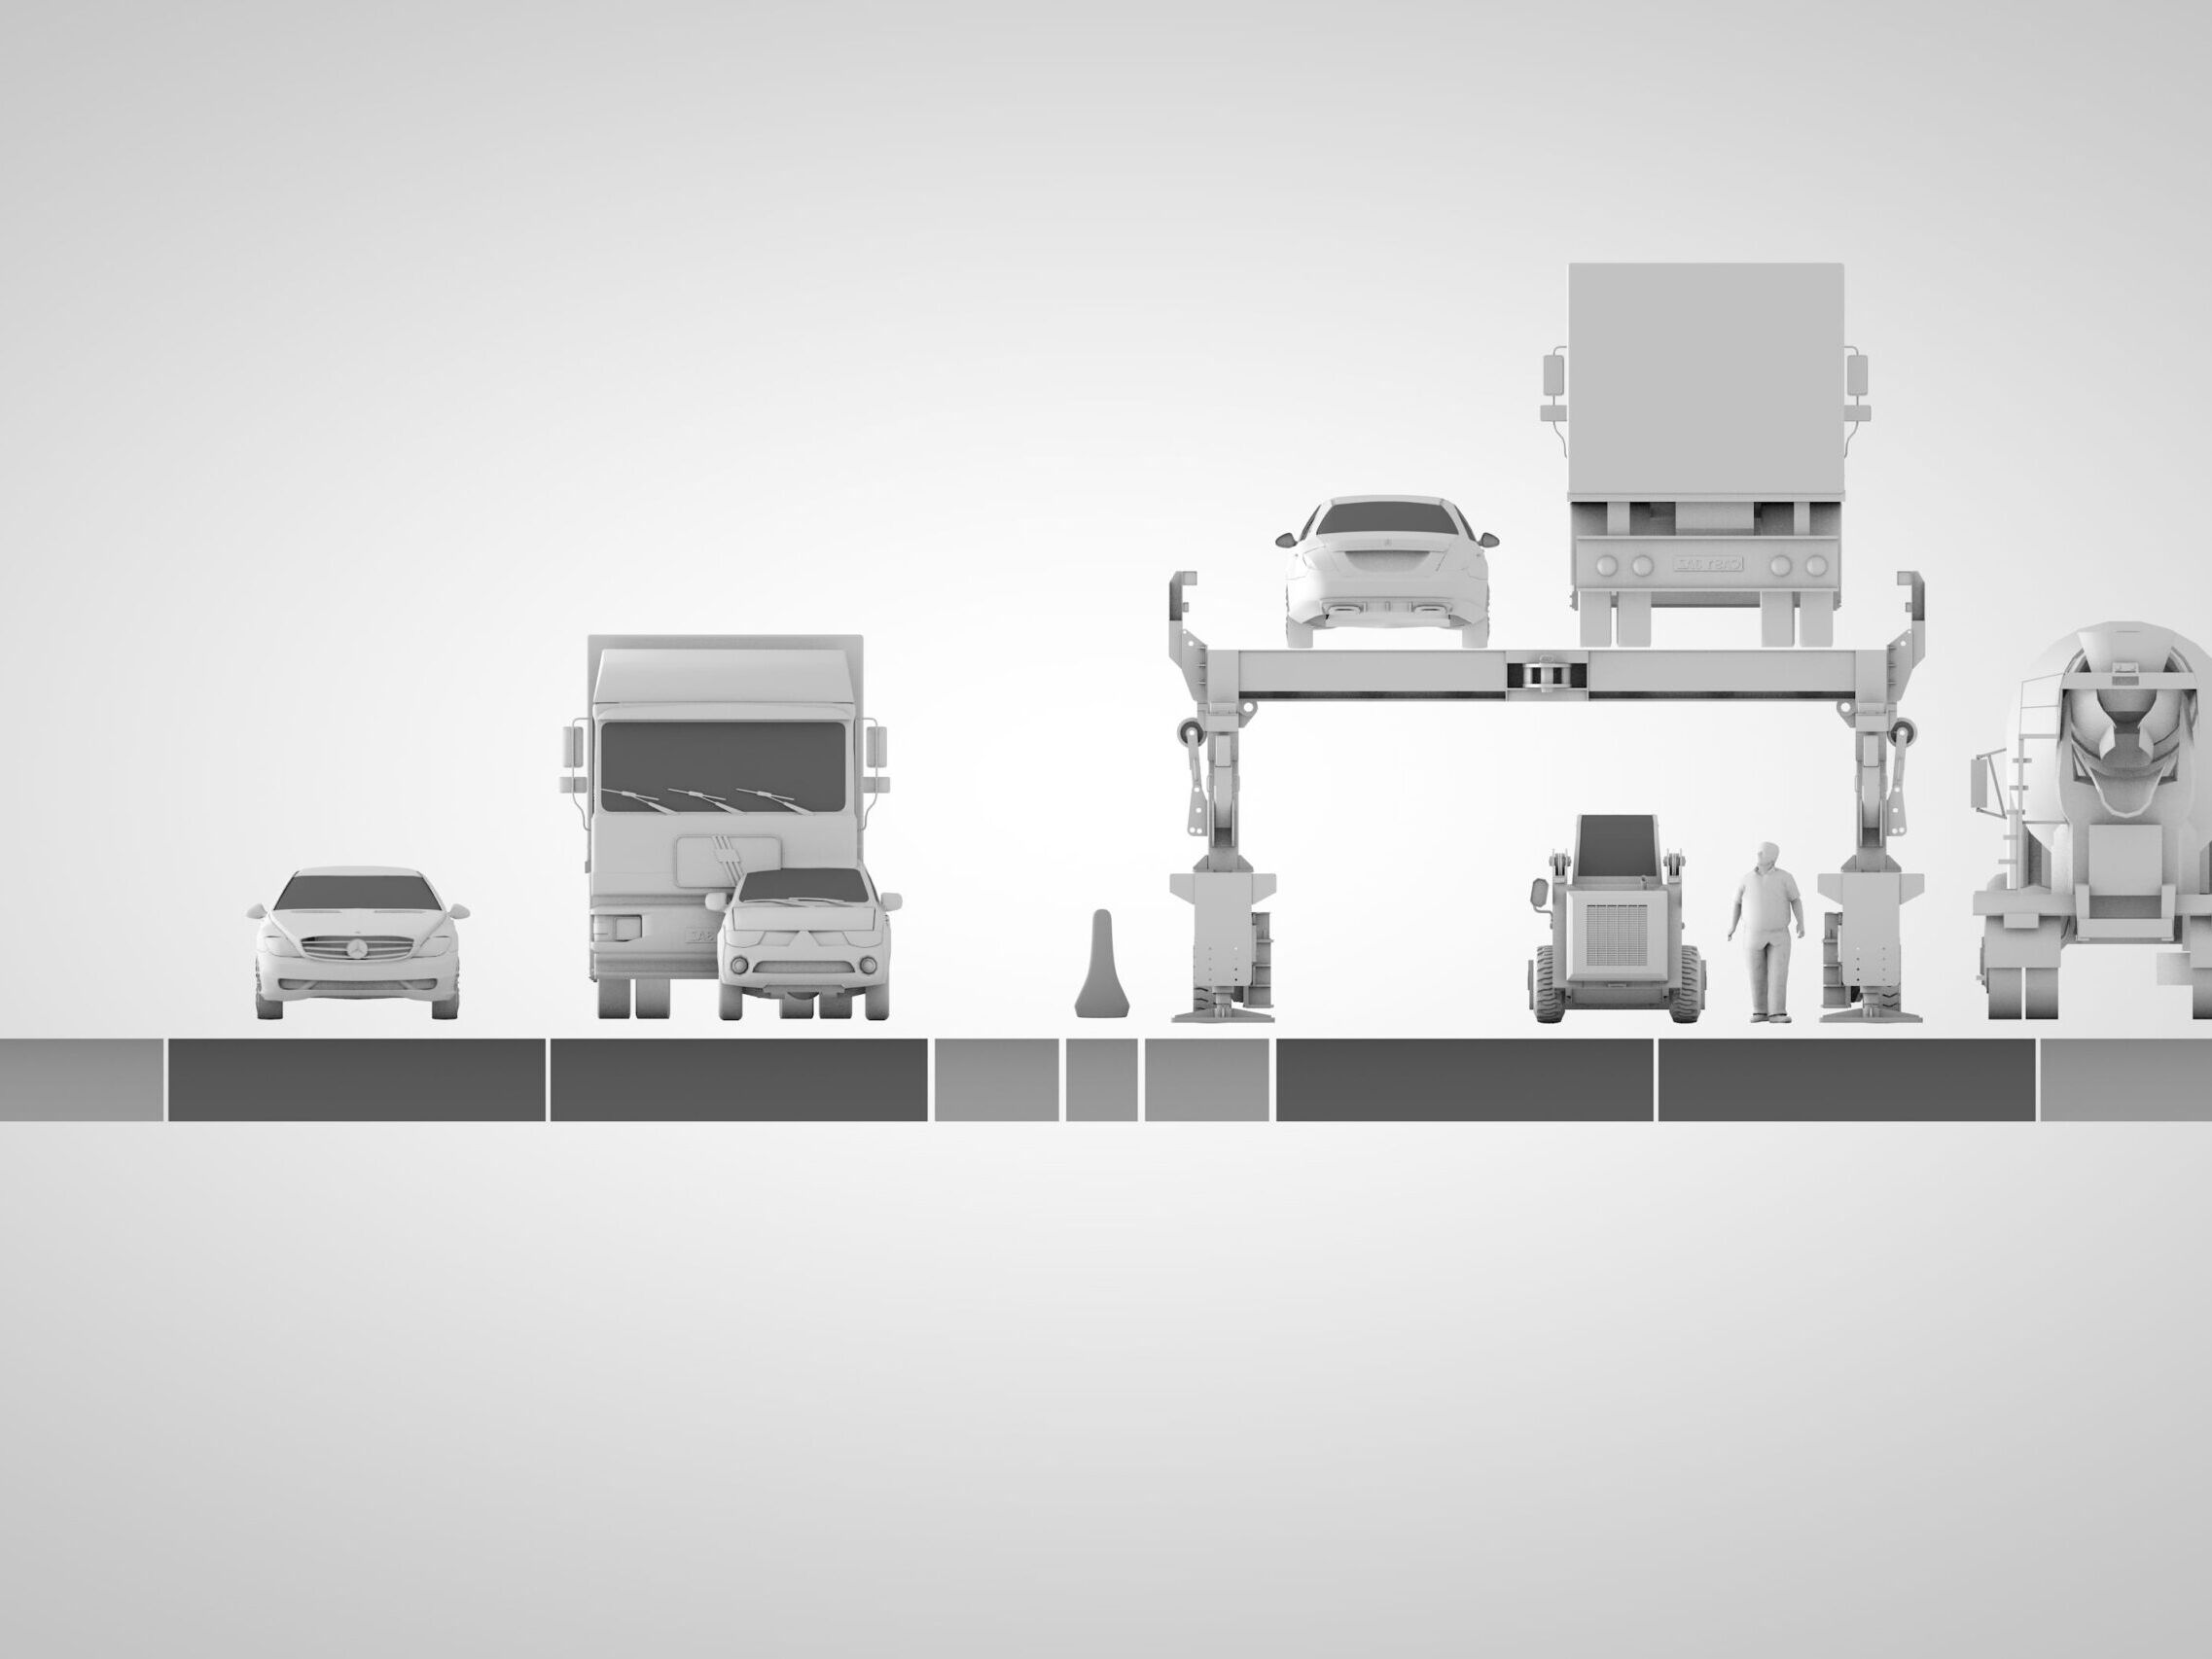 Rendering of the ASTRA-Bridge, mobile walkway for building sites created by the Federal Roads Office